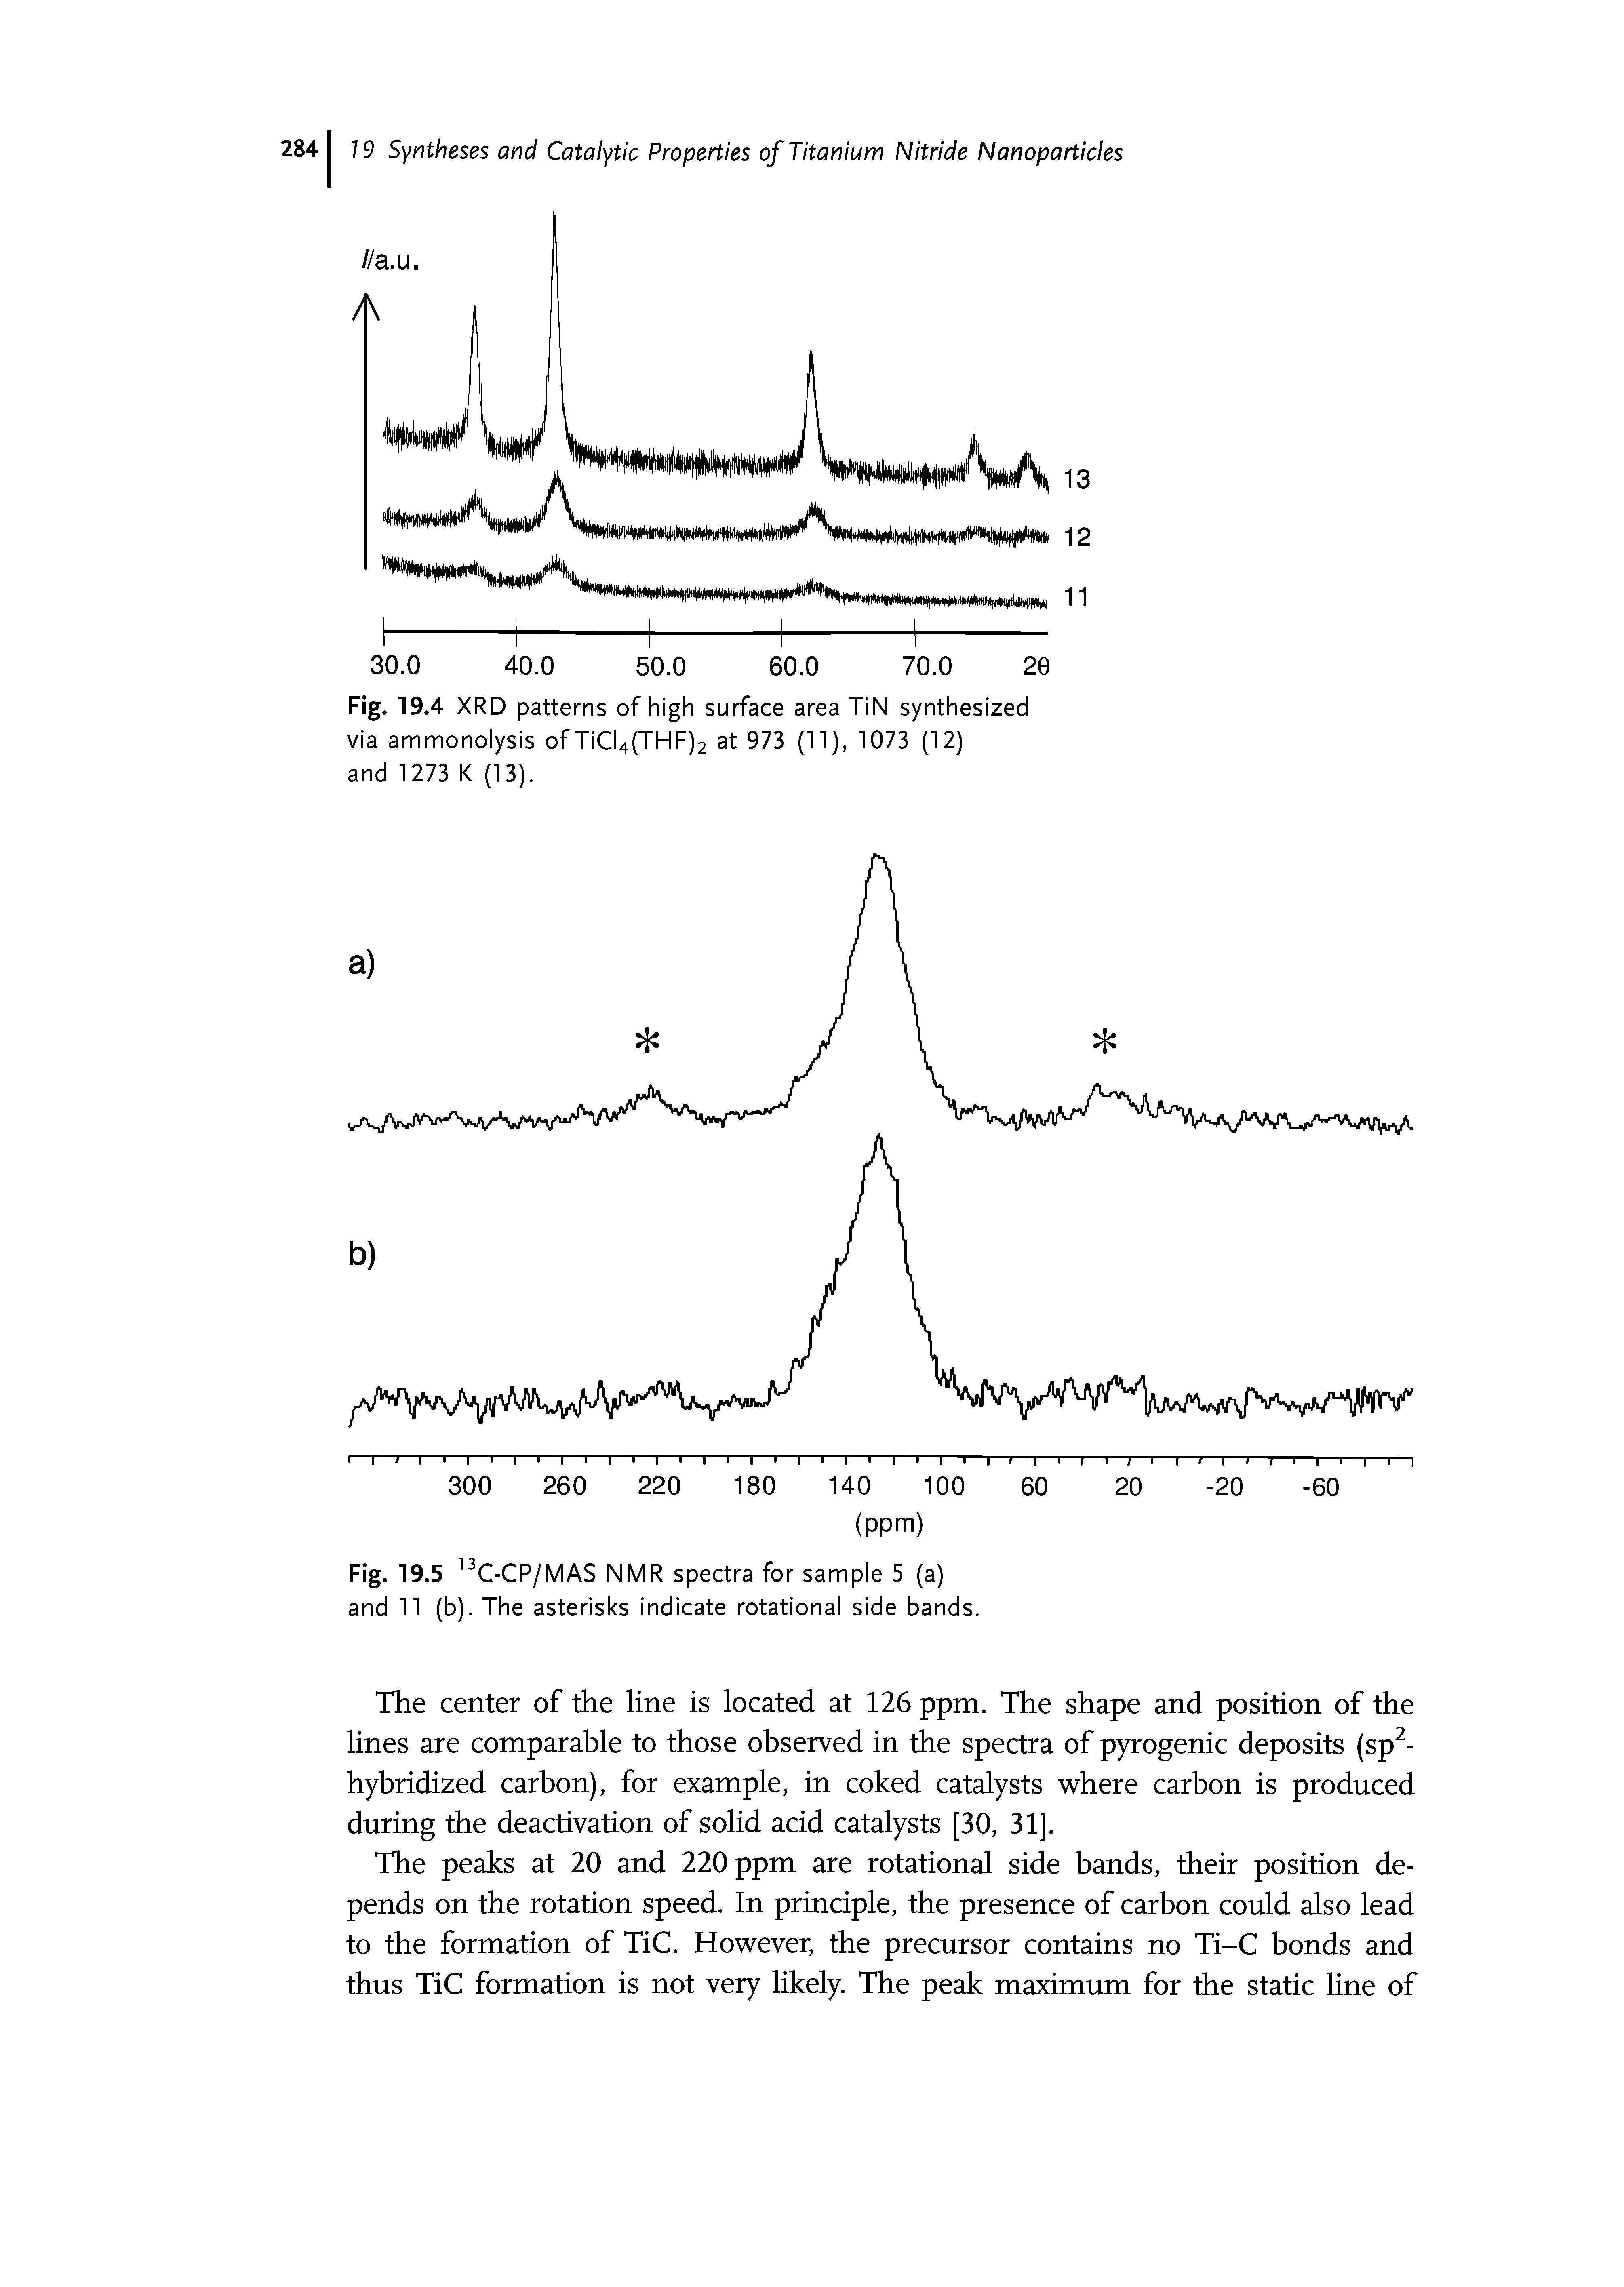 Fig. 19.5 C-CP/MAS NMR spectra for sample 5 (a) and 11 (b). The asterisks indicate rotational side bands.